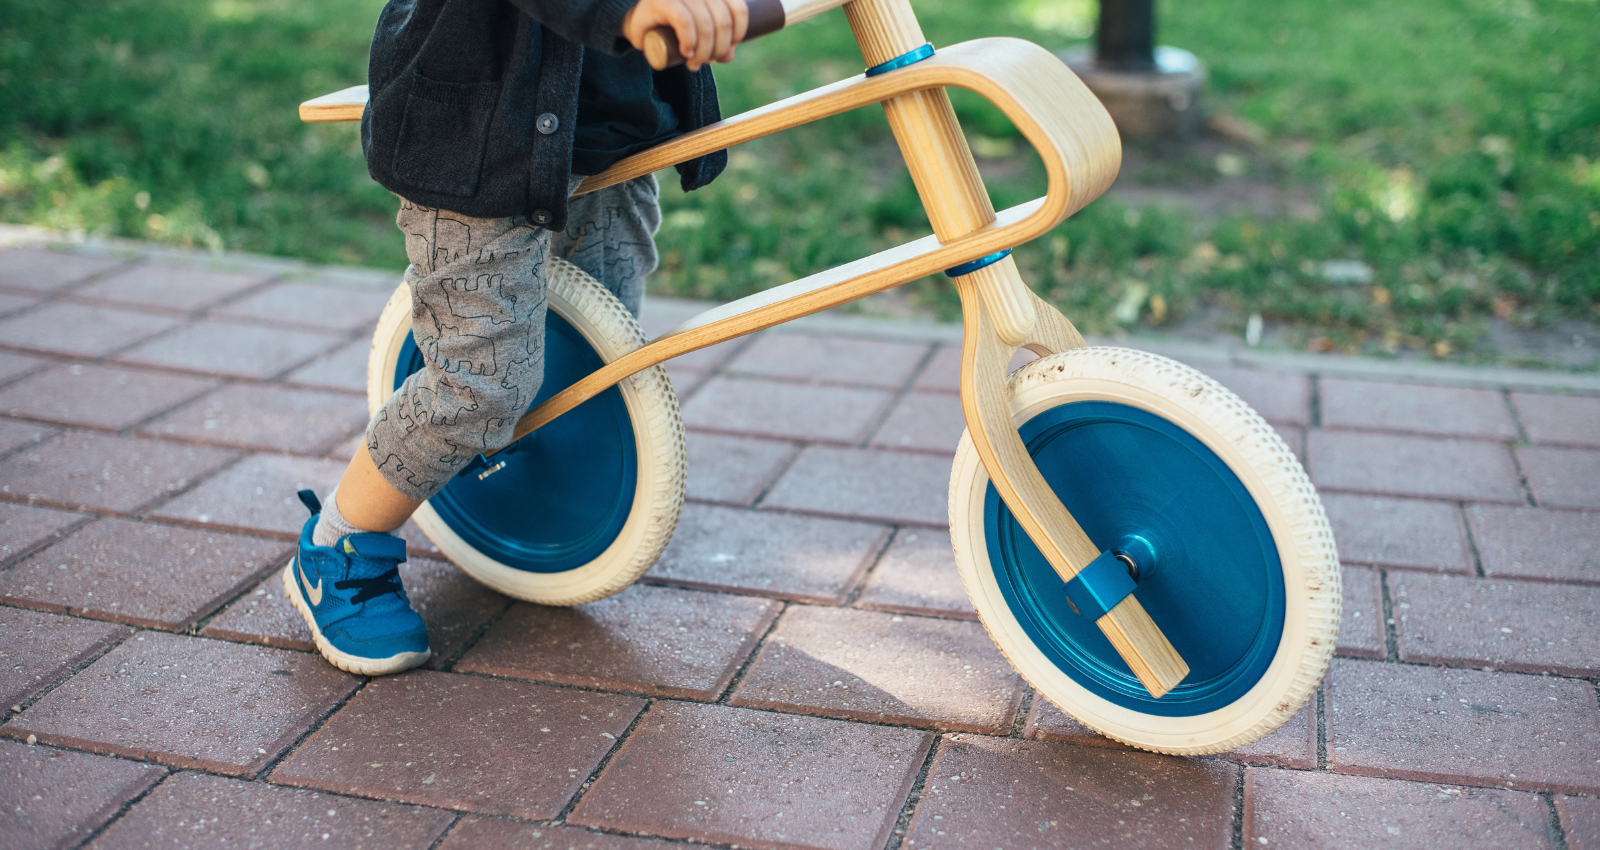 Image of a young child sitting on a wooden balance bike on a brick path